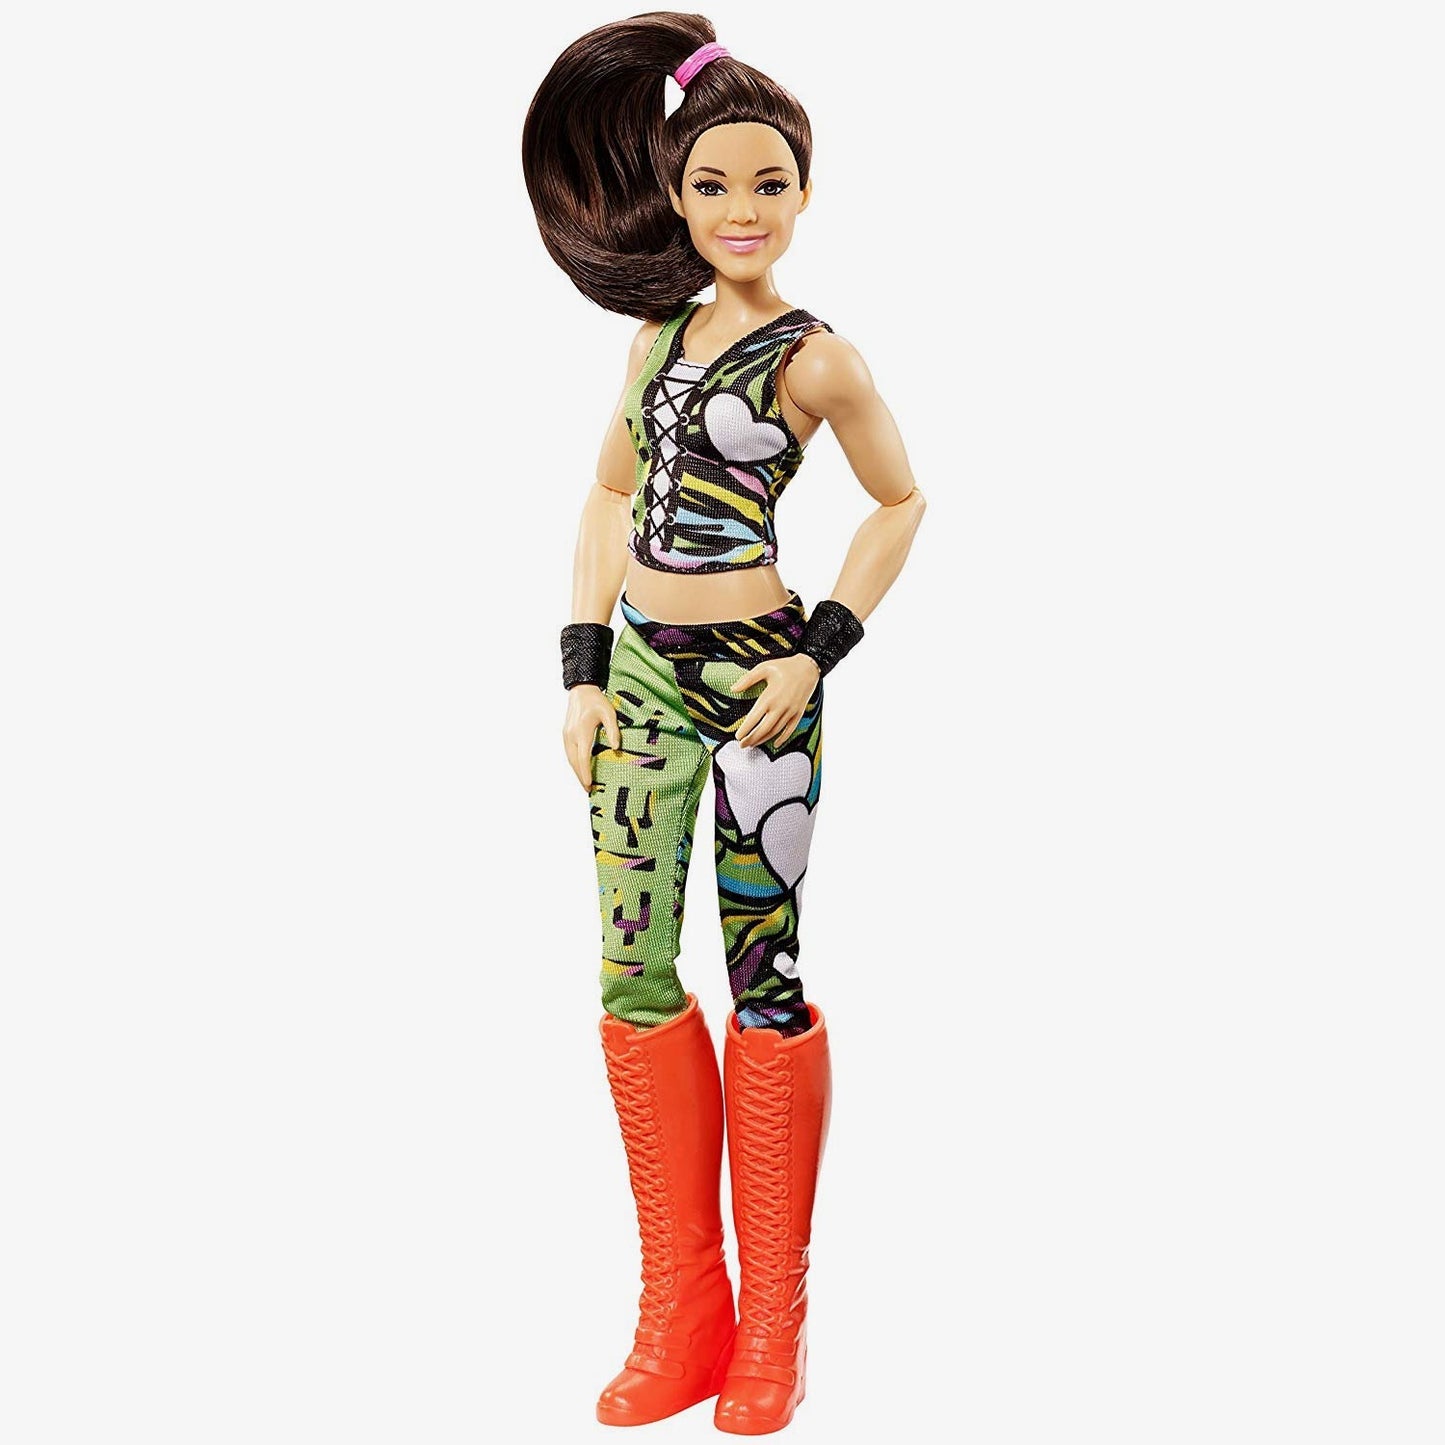 Bayley - 12 inch WWE Fashion Doll (With Extra Accessories)